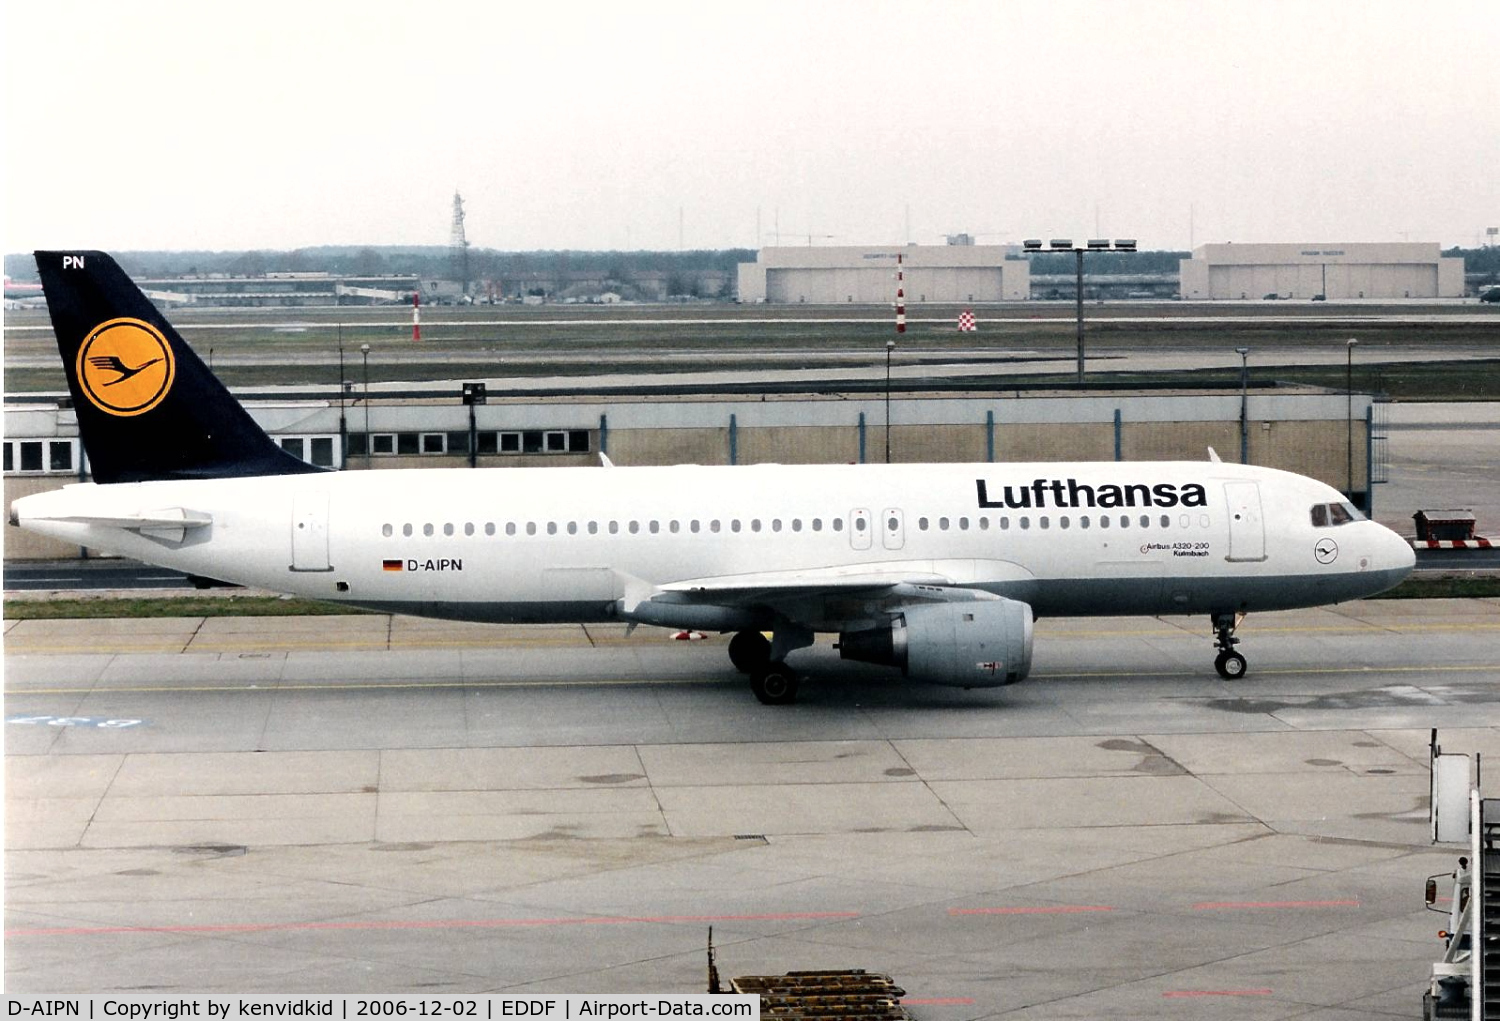 D-AIPN, 1990 Airbus A320-211 C/N 0105, Lufthansa, it was destroyed a few months after I photographed it.